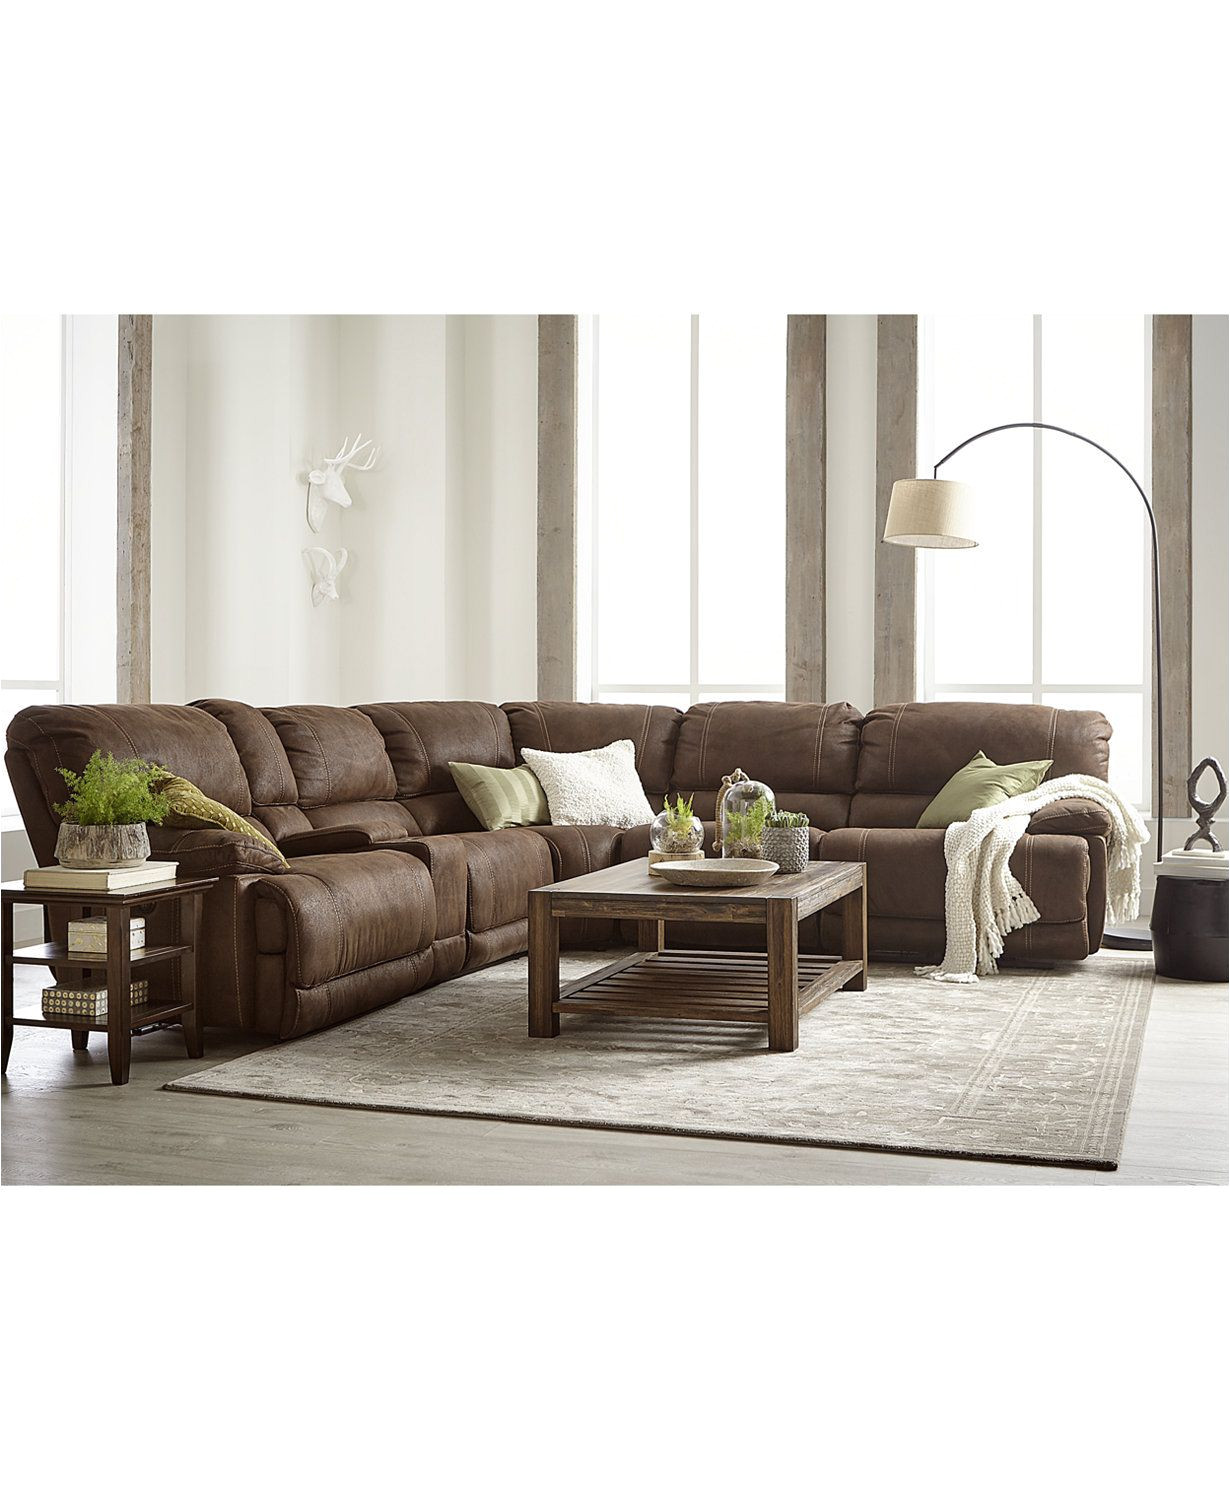 macys leather sectional sofa beautiful jedd fabric power reclining sectional sofa collection of macys leather sectional